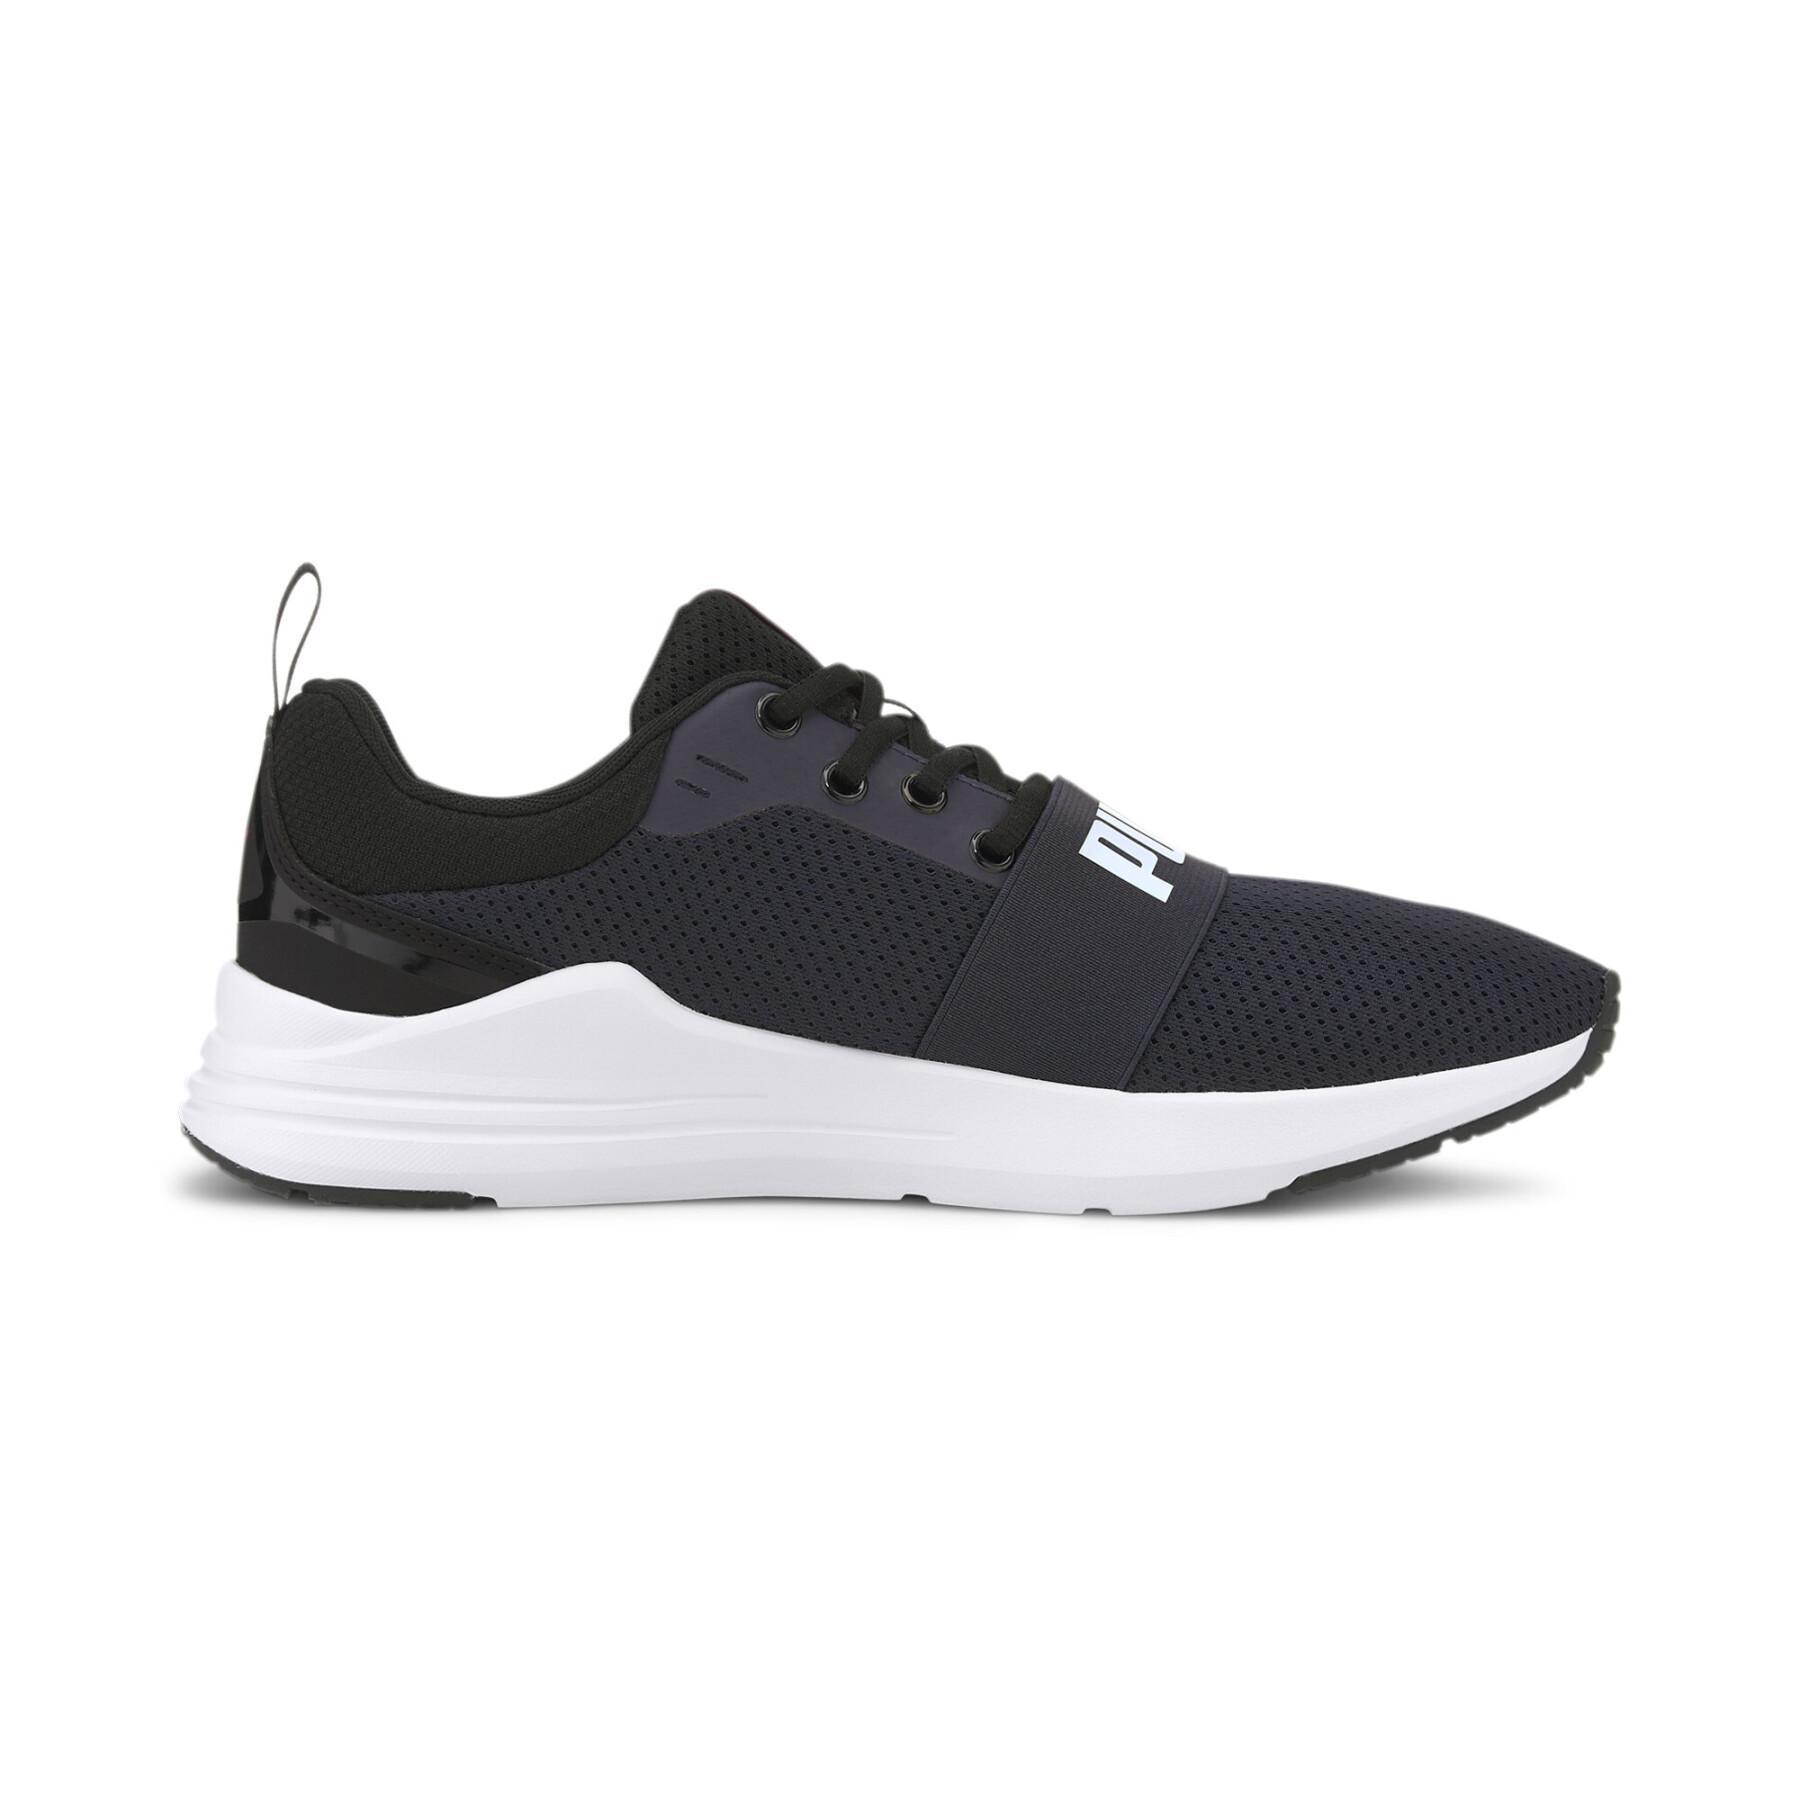 Formadores Puma Wired Run